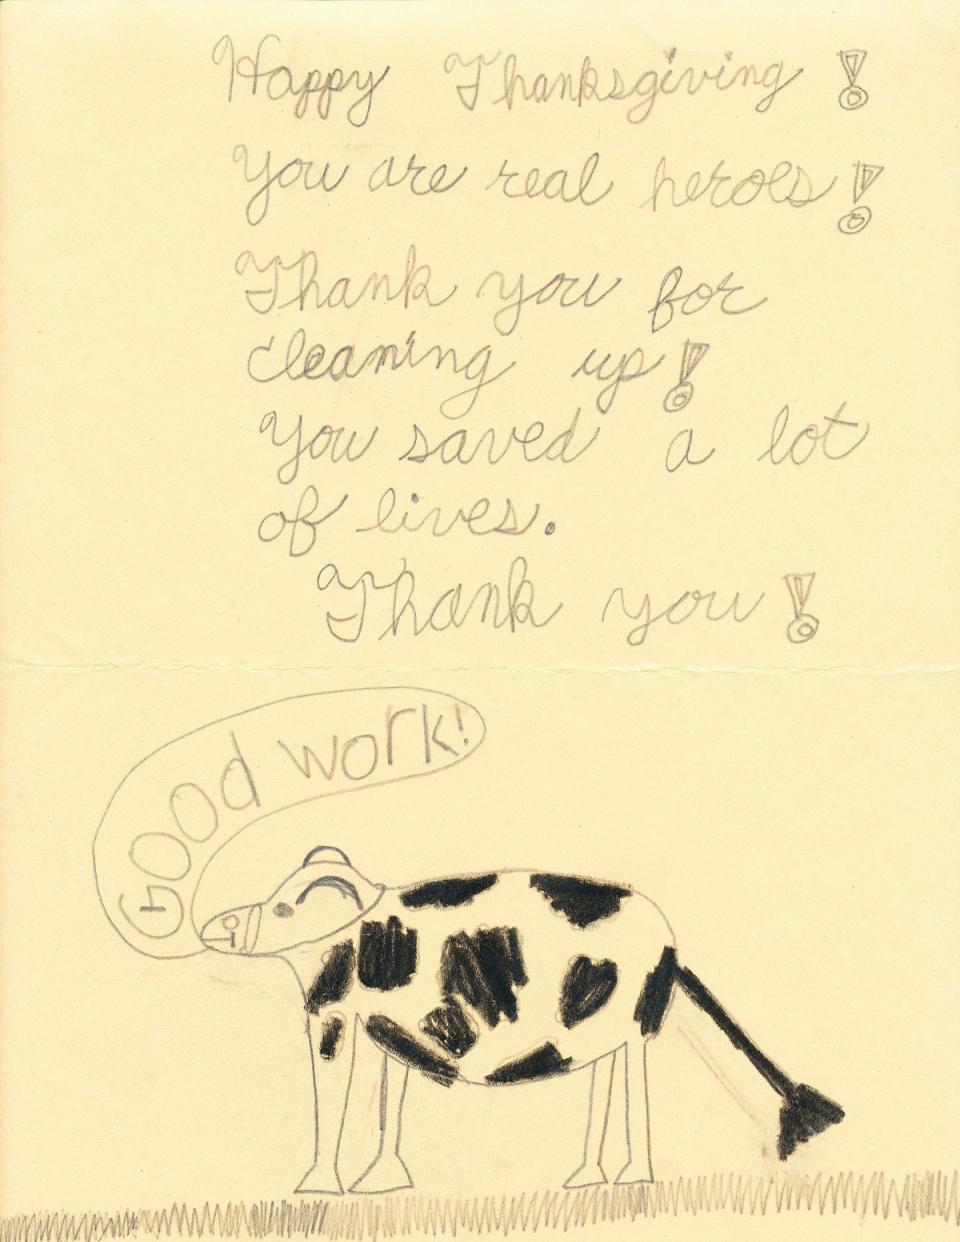 A child’s drawing created at Trinity Church after 9/11 shows an animal saying the words “Good work.” A message above the drawing of the animal reads: “Happy Thanksgiving! You are the heroes! Thank you for cleaning up! You saved a lot of lives! Thank you!”